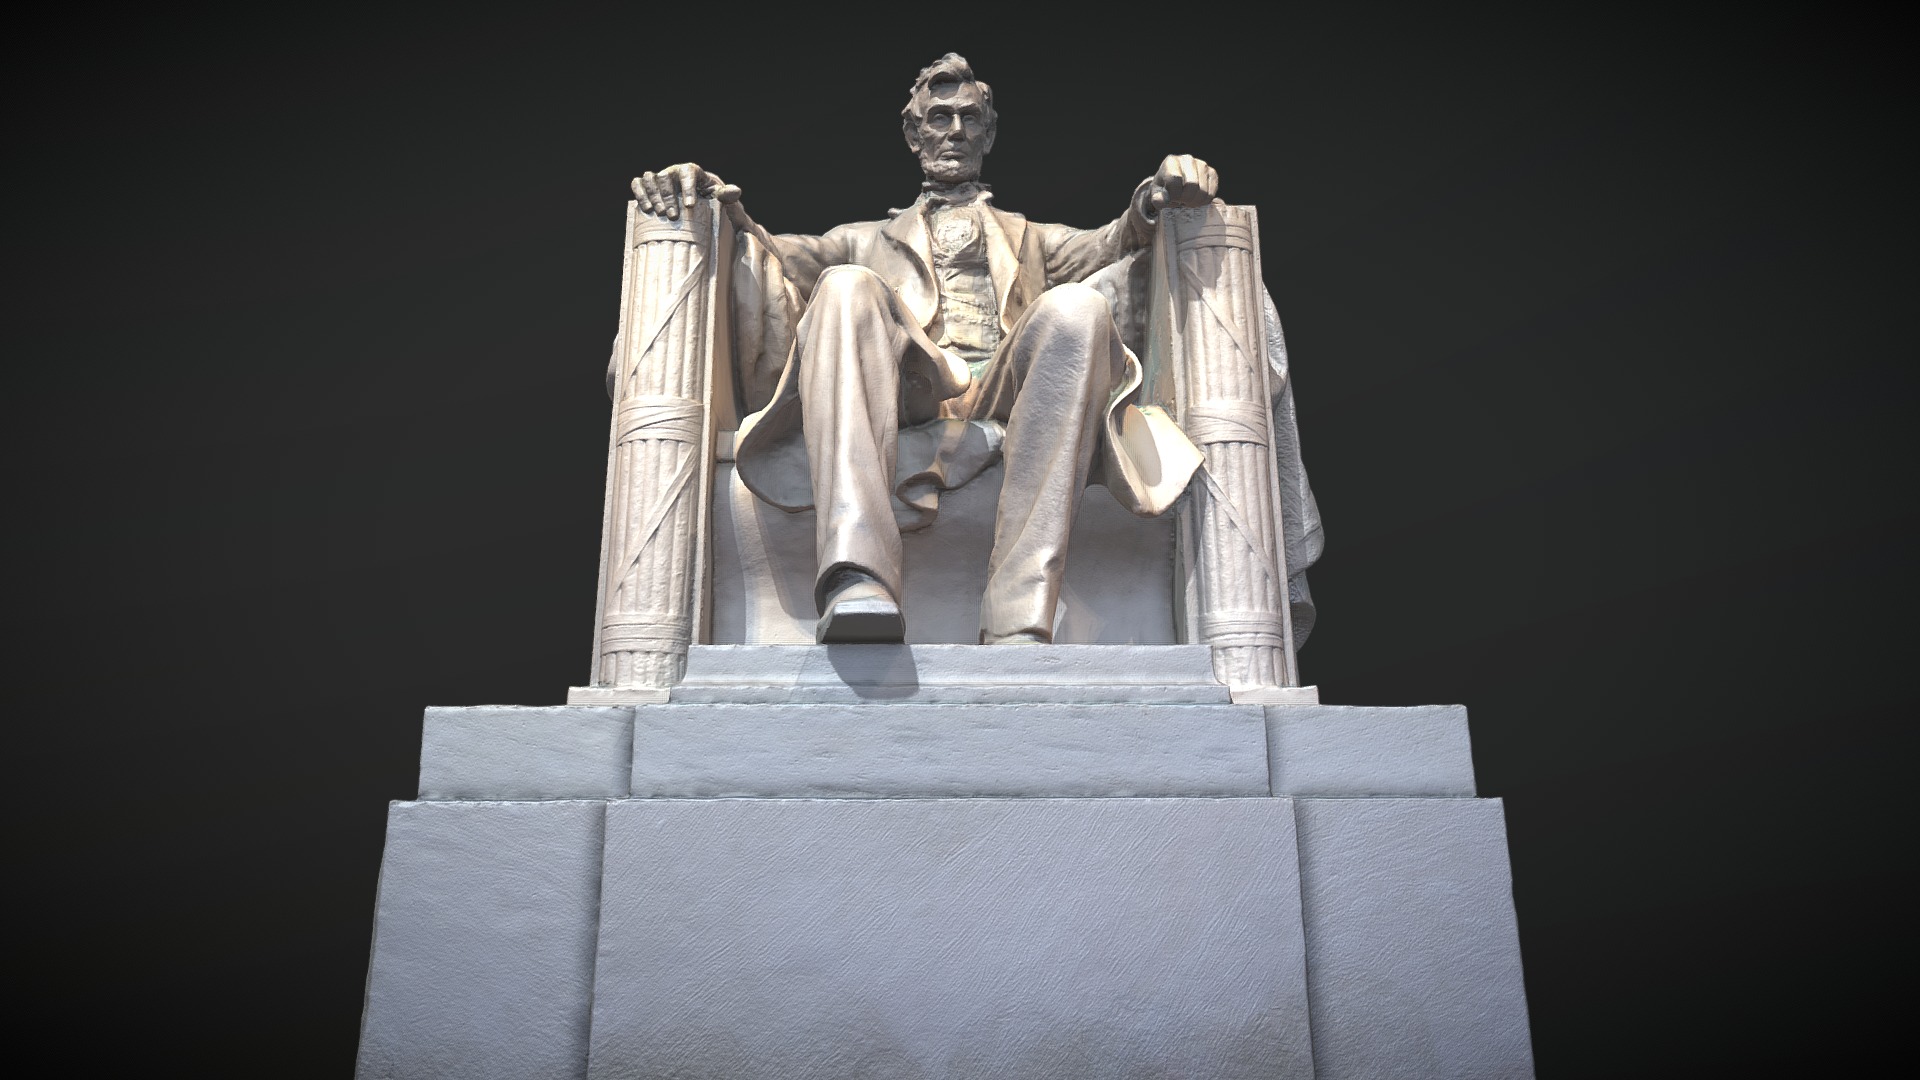 3D model Lincoln Memorial – Washington, D.C. - This is a 3D model of the Lincoln Memorial - Washington, D.C.. The 3D model is about a statue of a person sitting on a stone pedestal with Lincoln Memorial in the background.